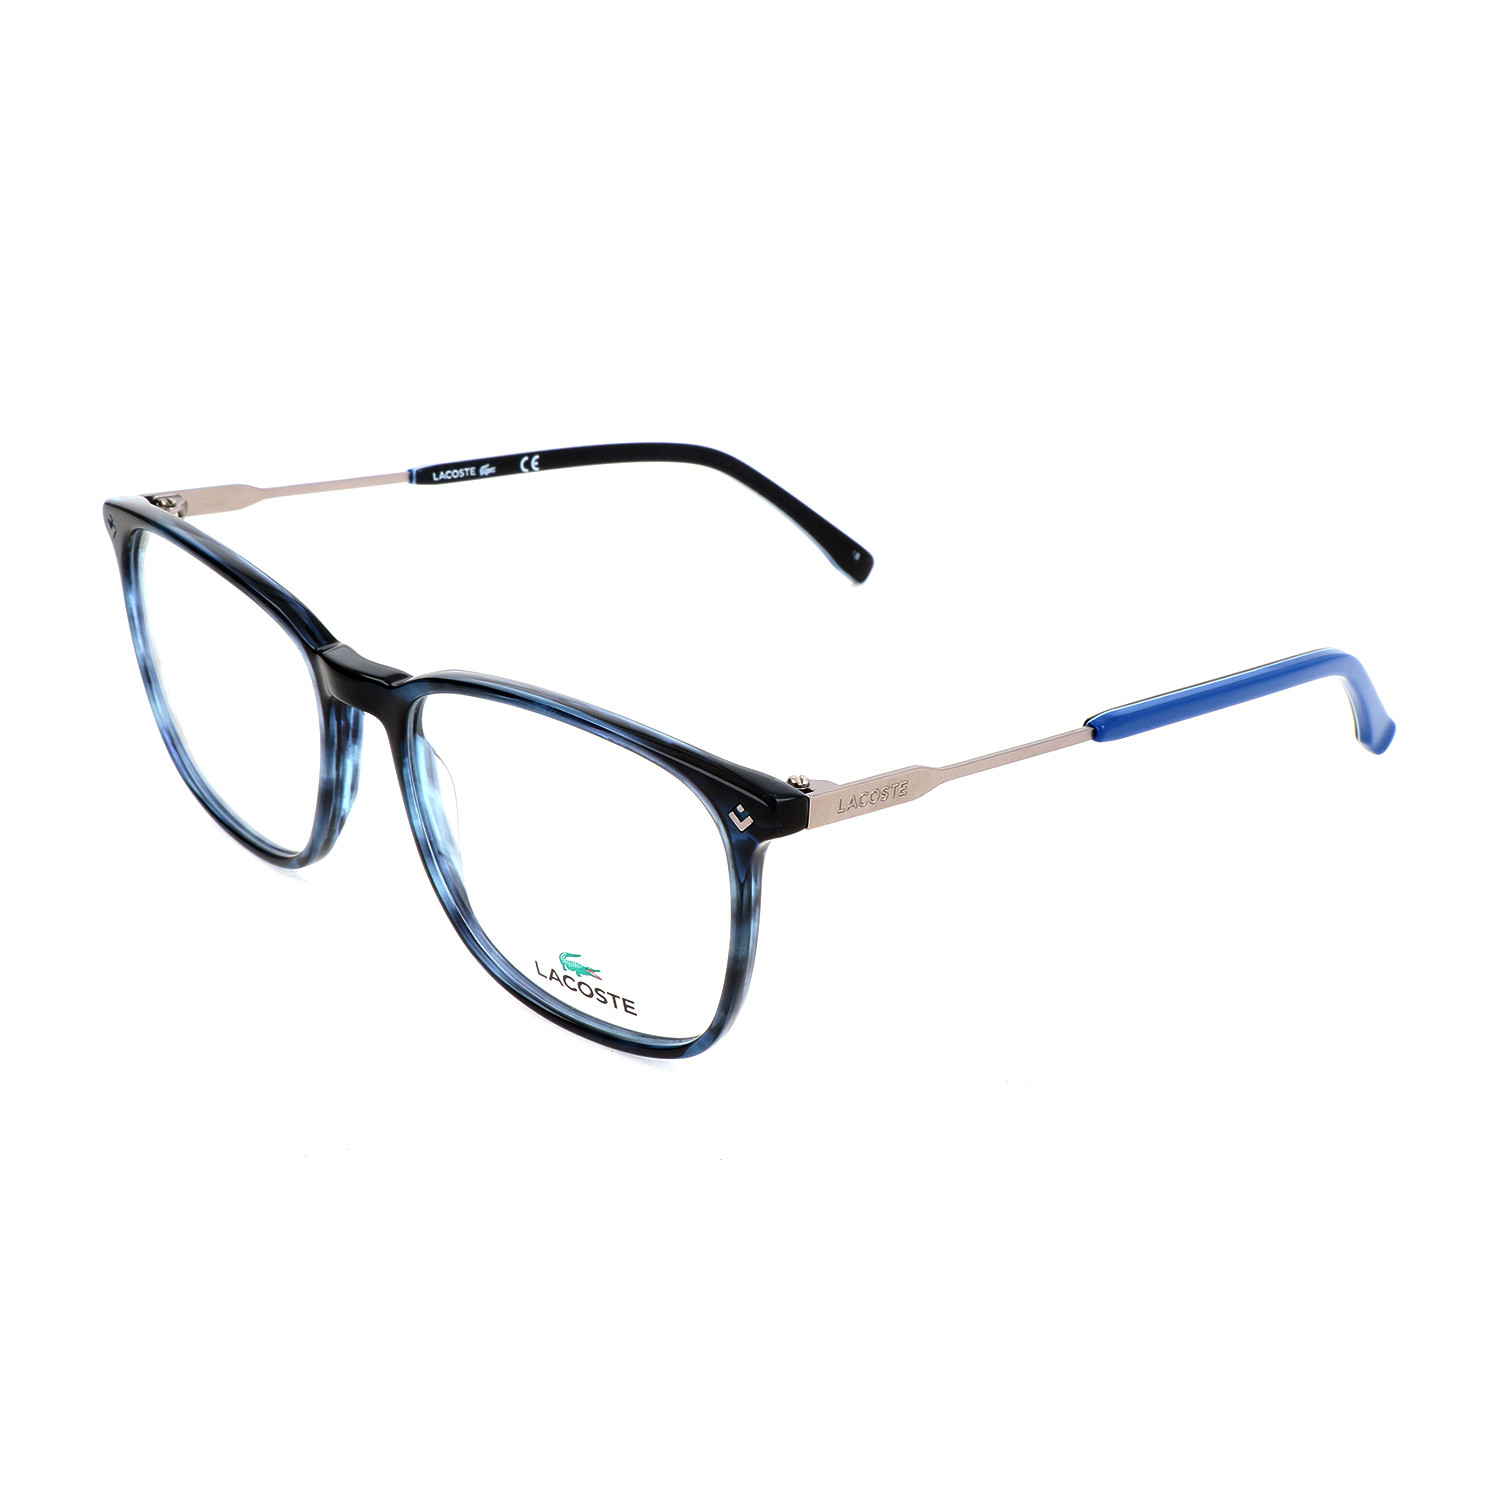 Men's L2805 Optical Frames // Striped Blue - Lacoste - Touch of Modern